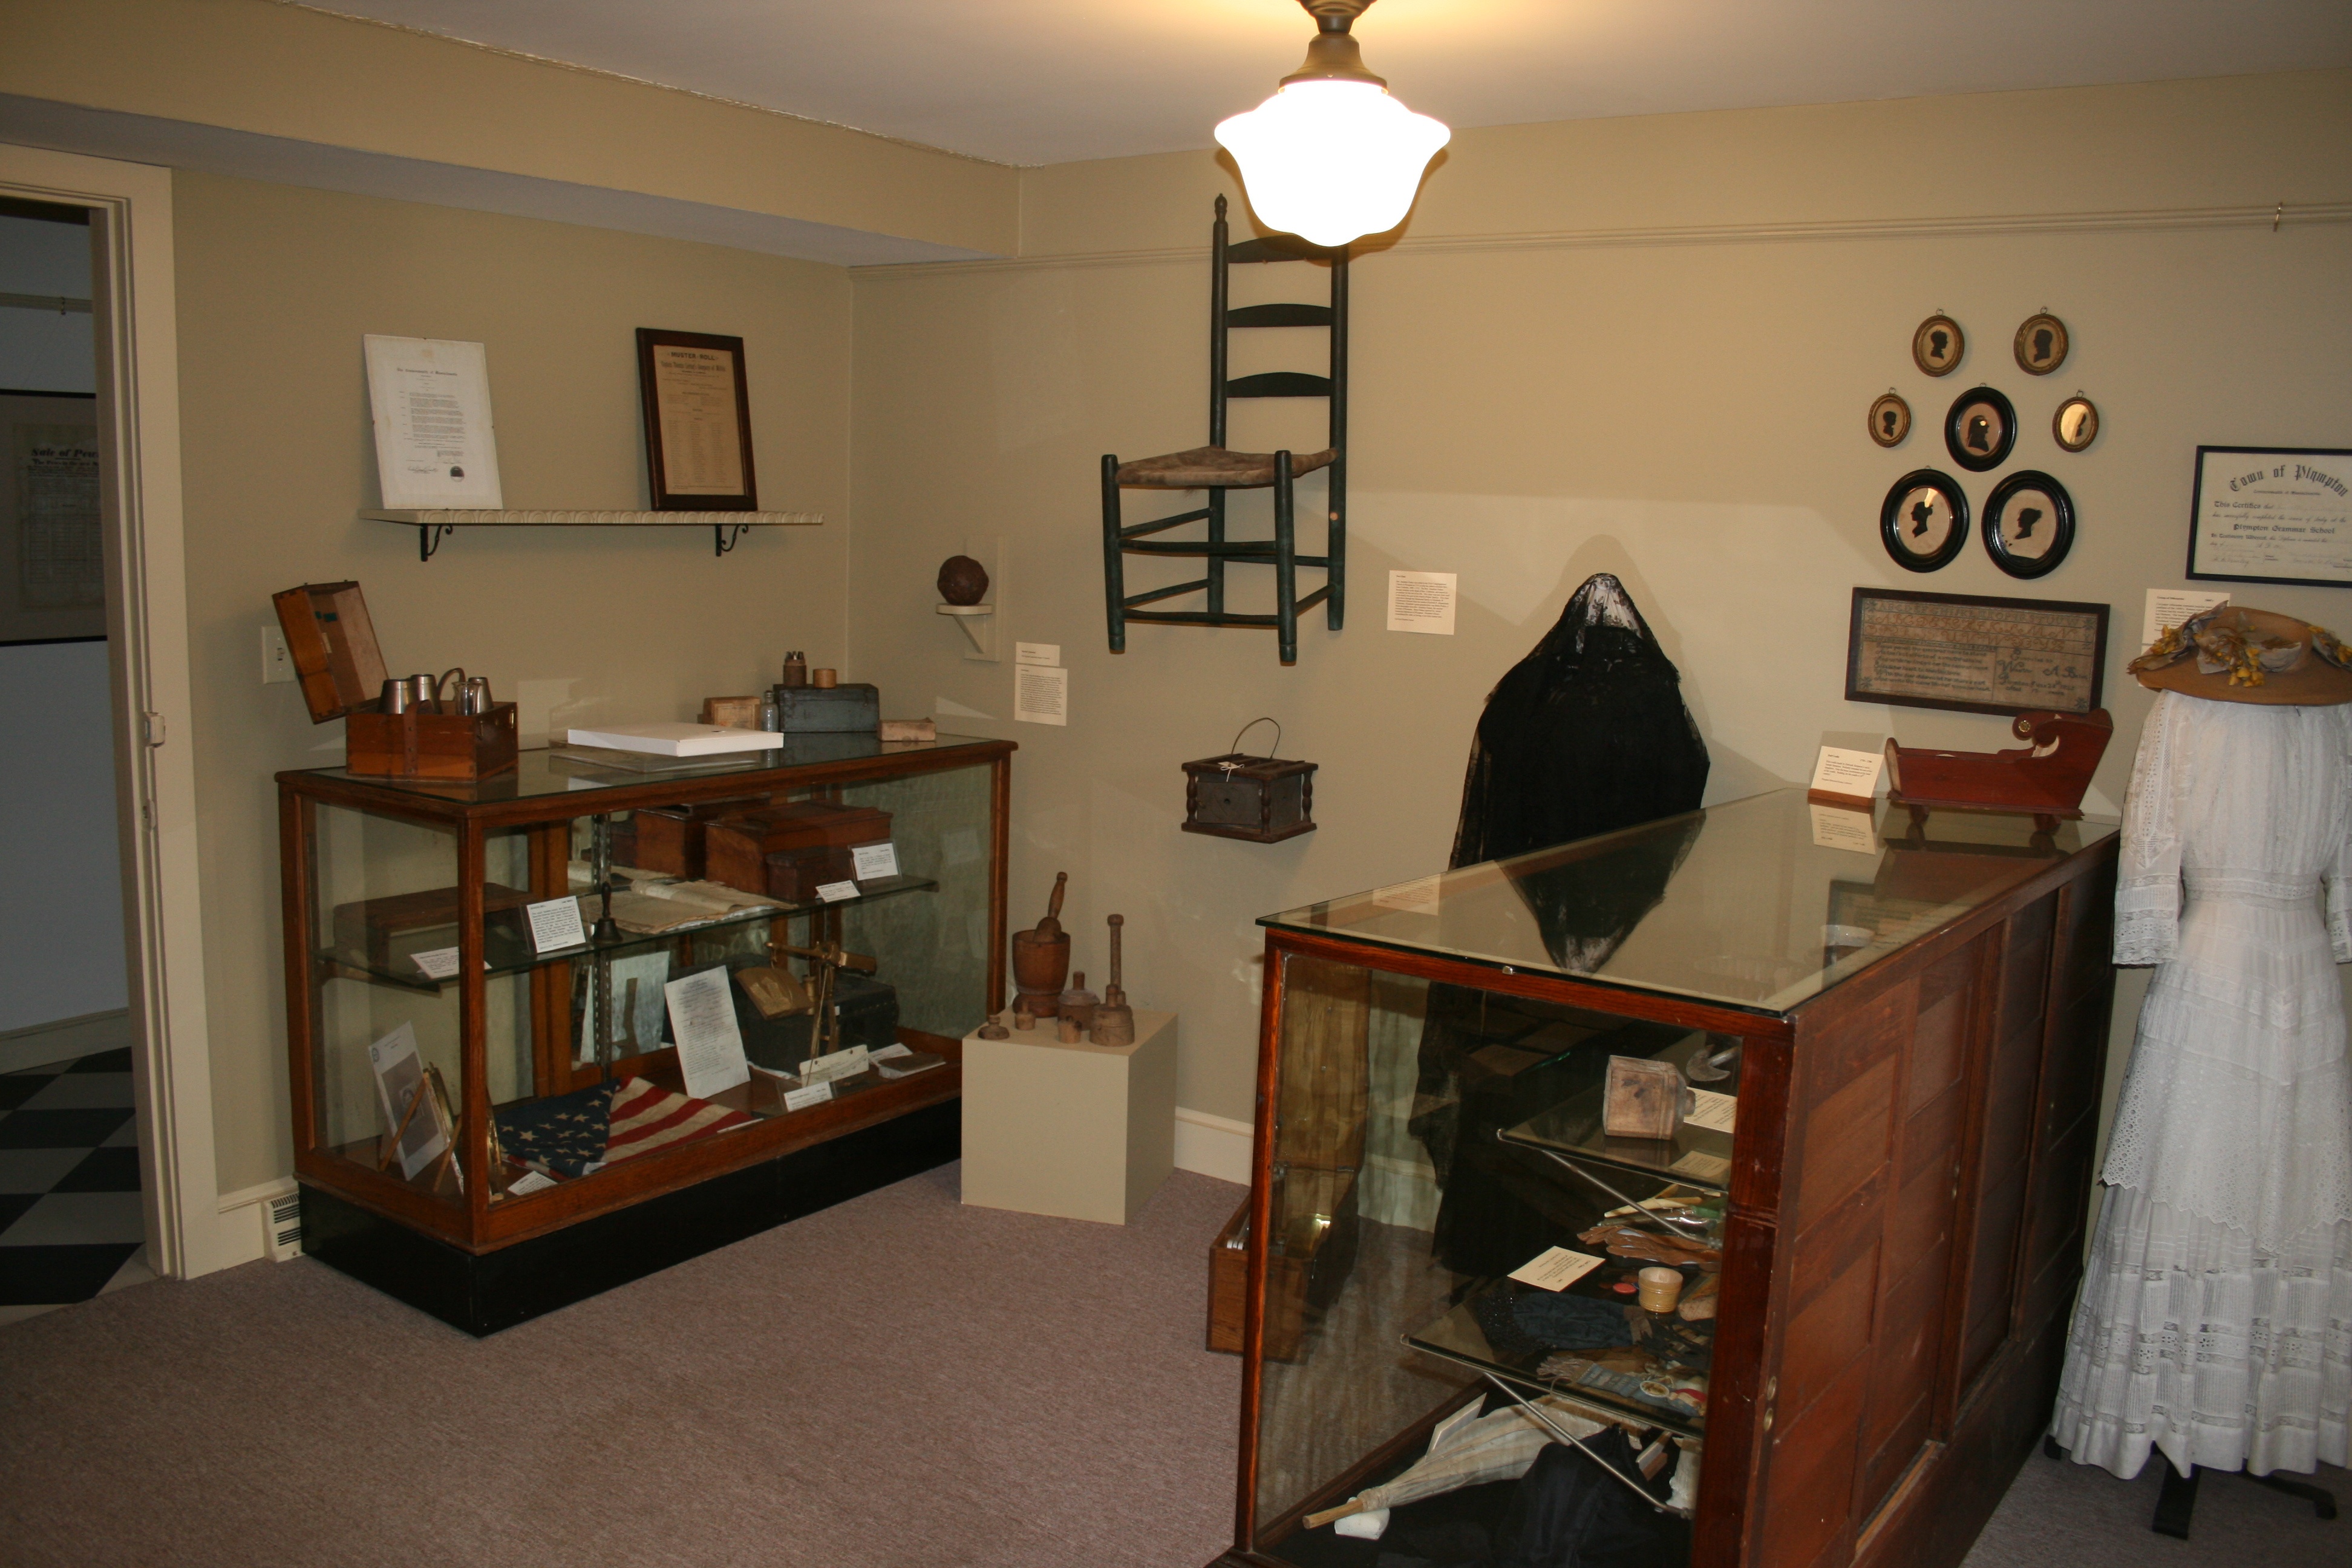 Inside the museum room